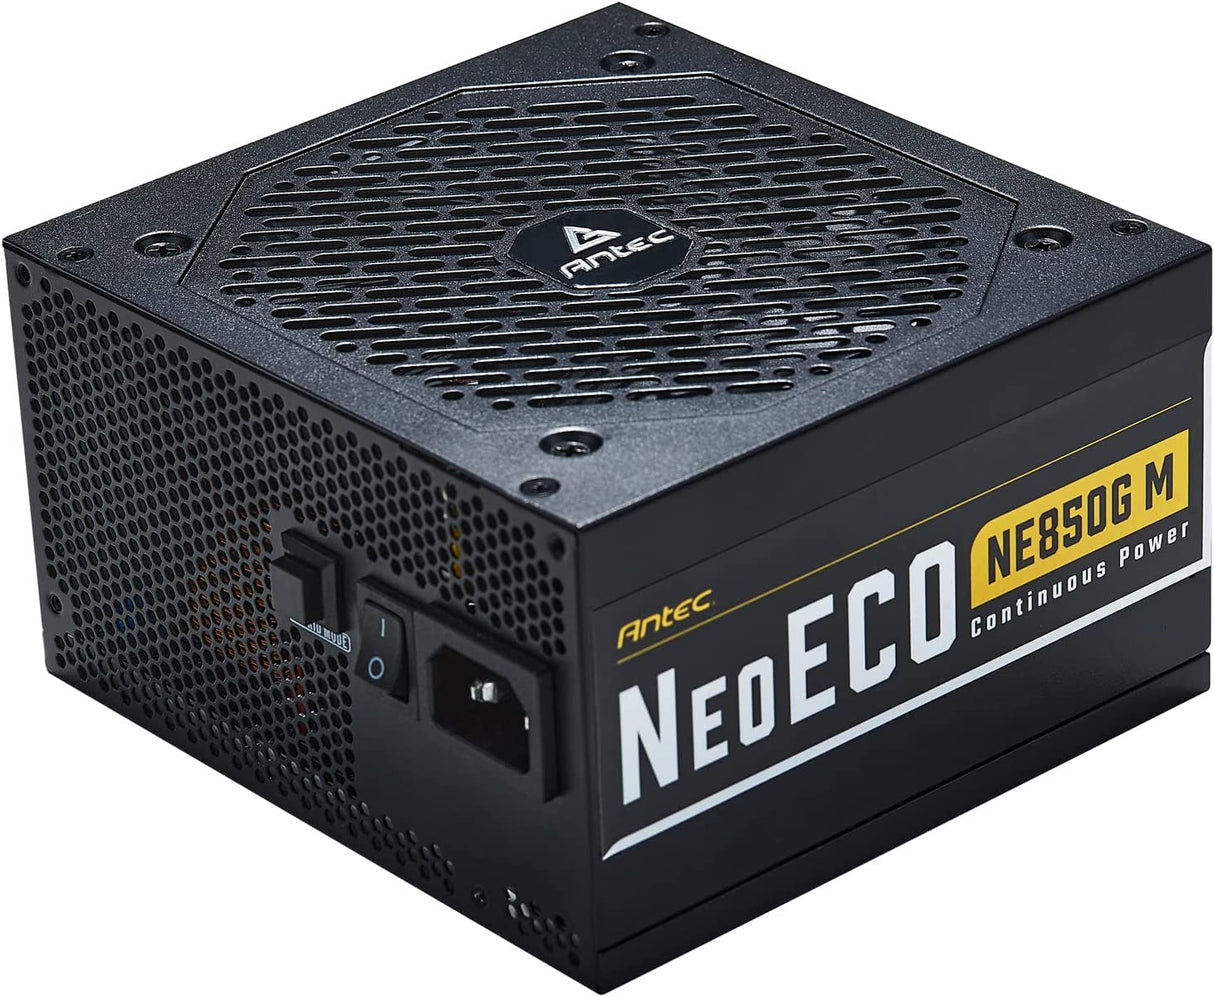 Antec NeoECO Series NE850G M, 80 Plus Gold Certified, 850W Full Modular with PhaseWave Design, Japanese Caps, Zero RPM Manager, 120 mm Silent Fan, ATX 12V 2.4 &amp; 7-Year Warranty 850W Gold